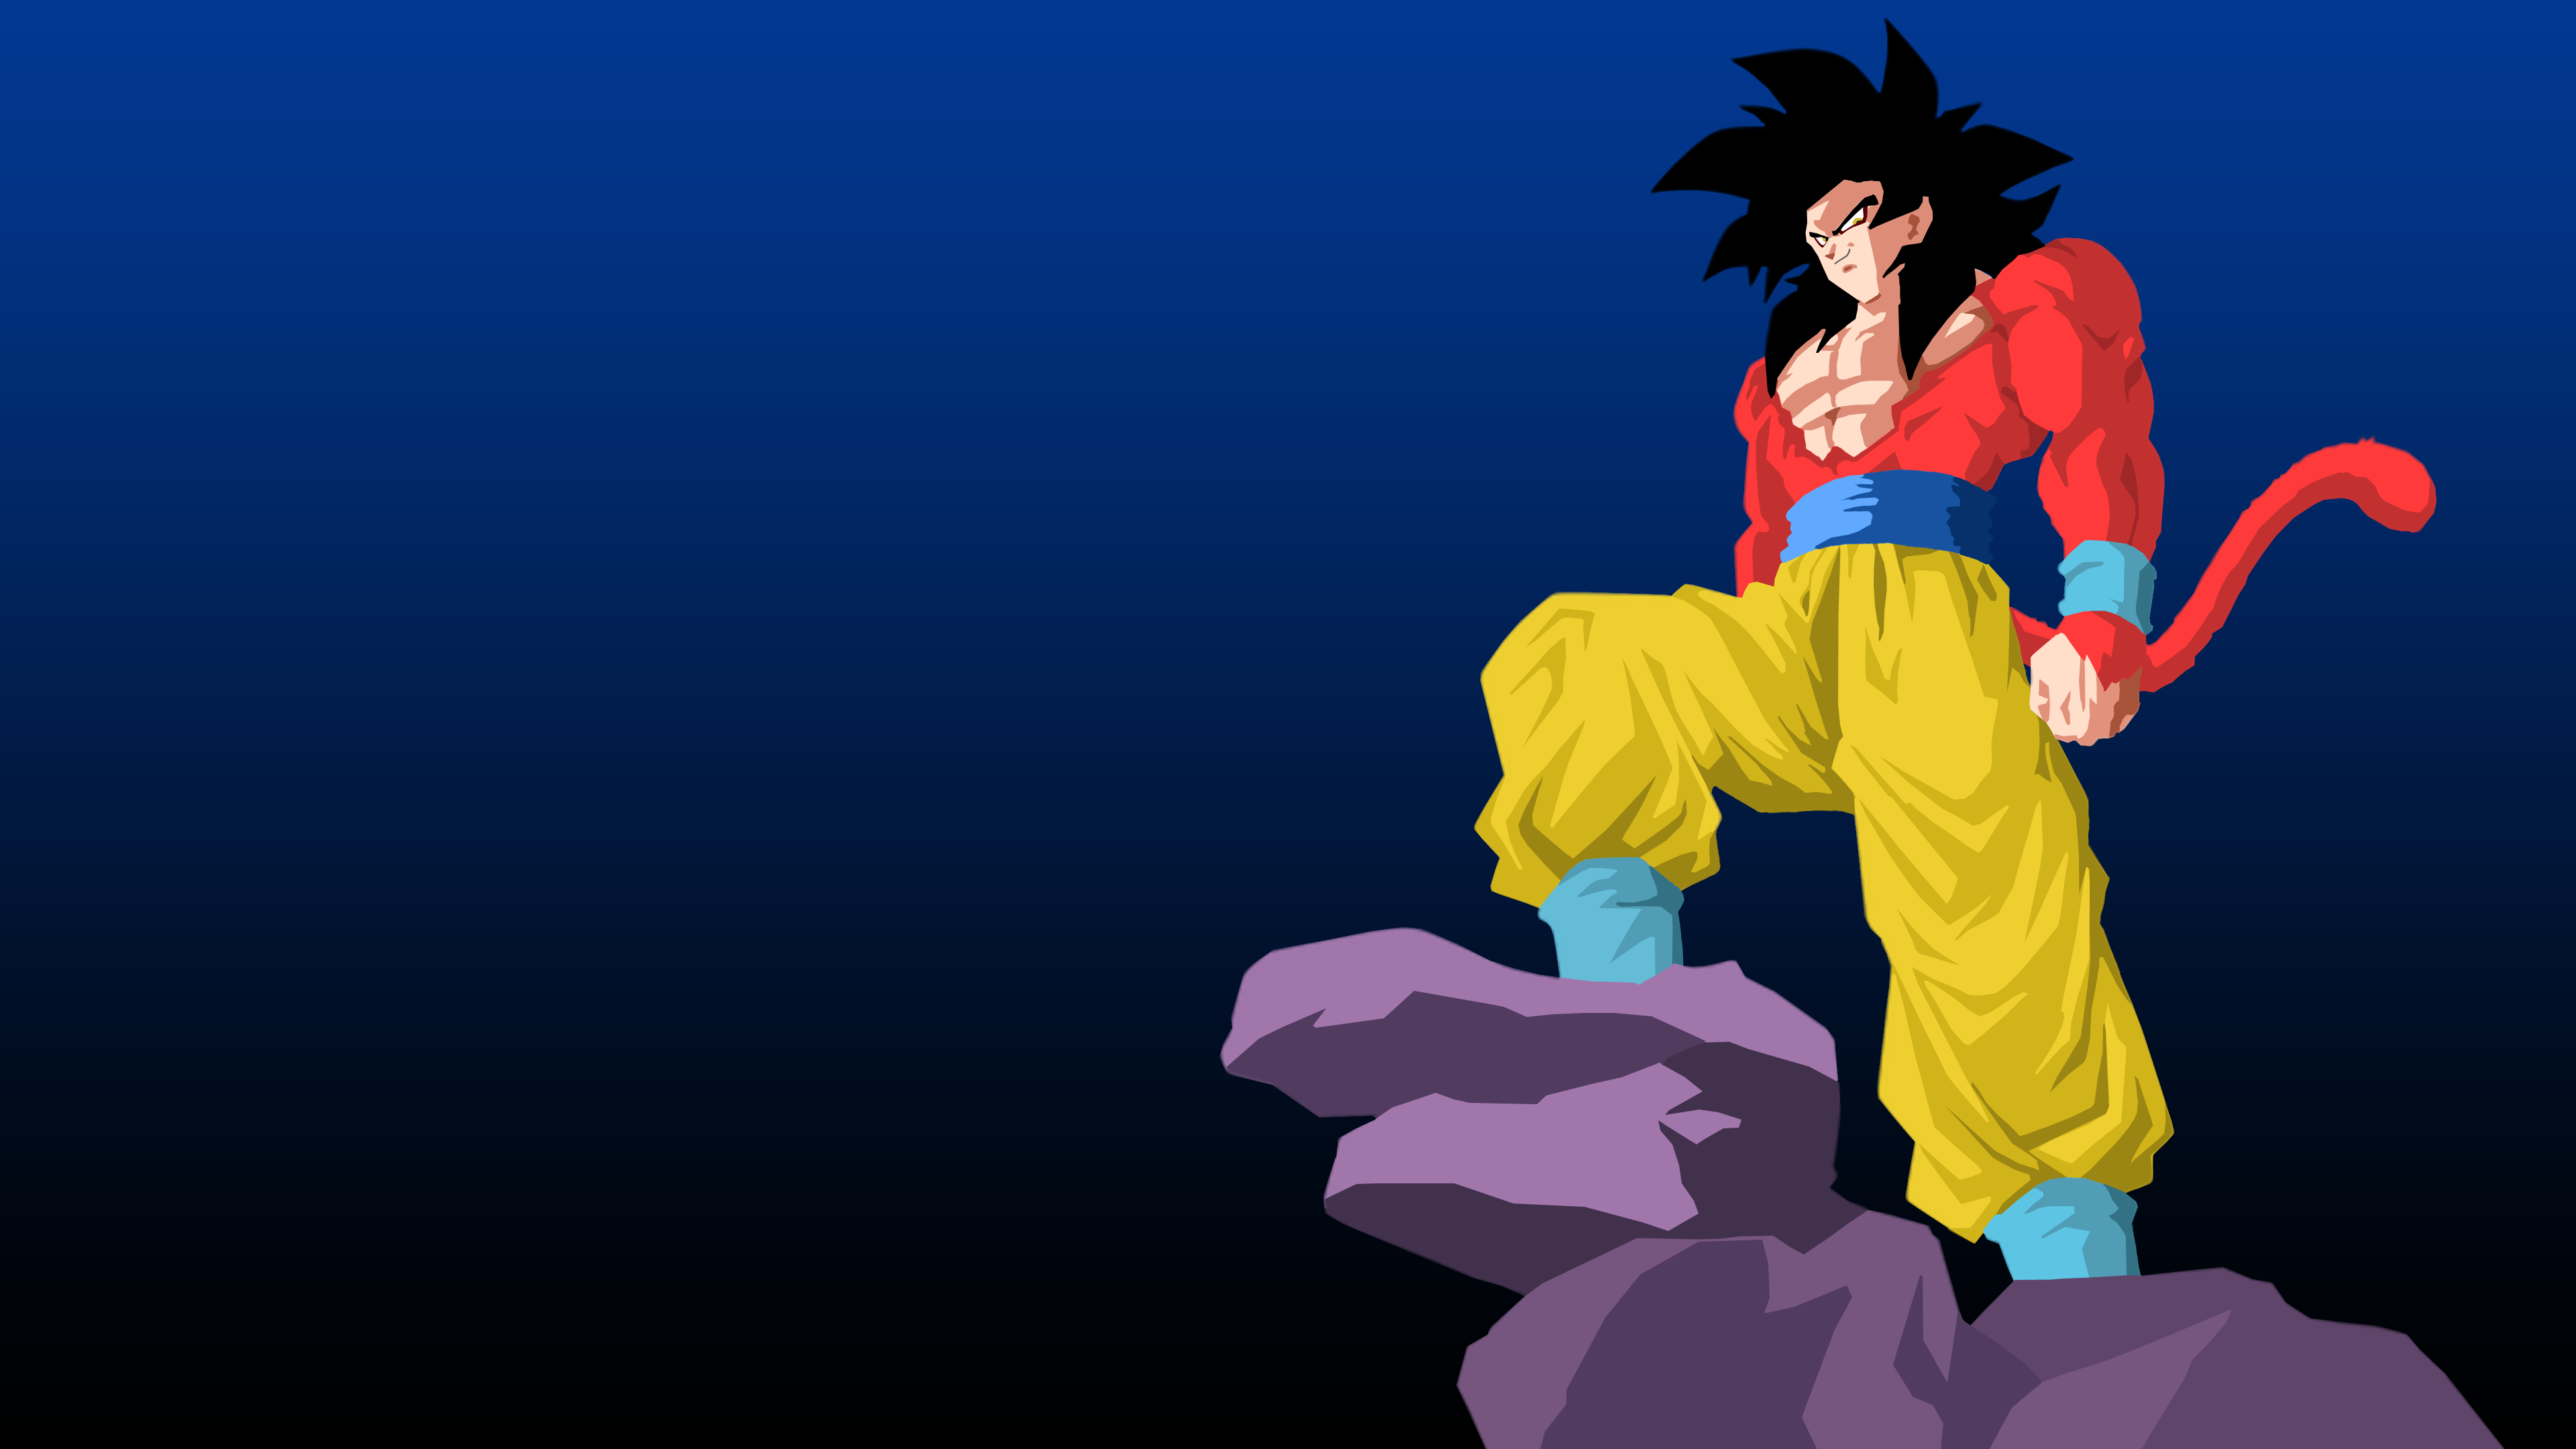 Just finished this SSJ4 Goku 4K wallpaper. I think it came out pretty okay.: dbz